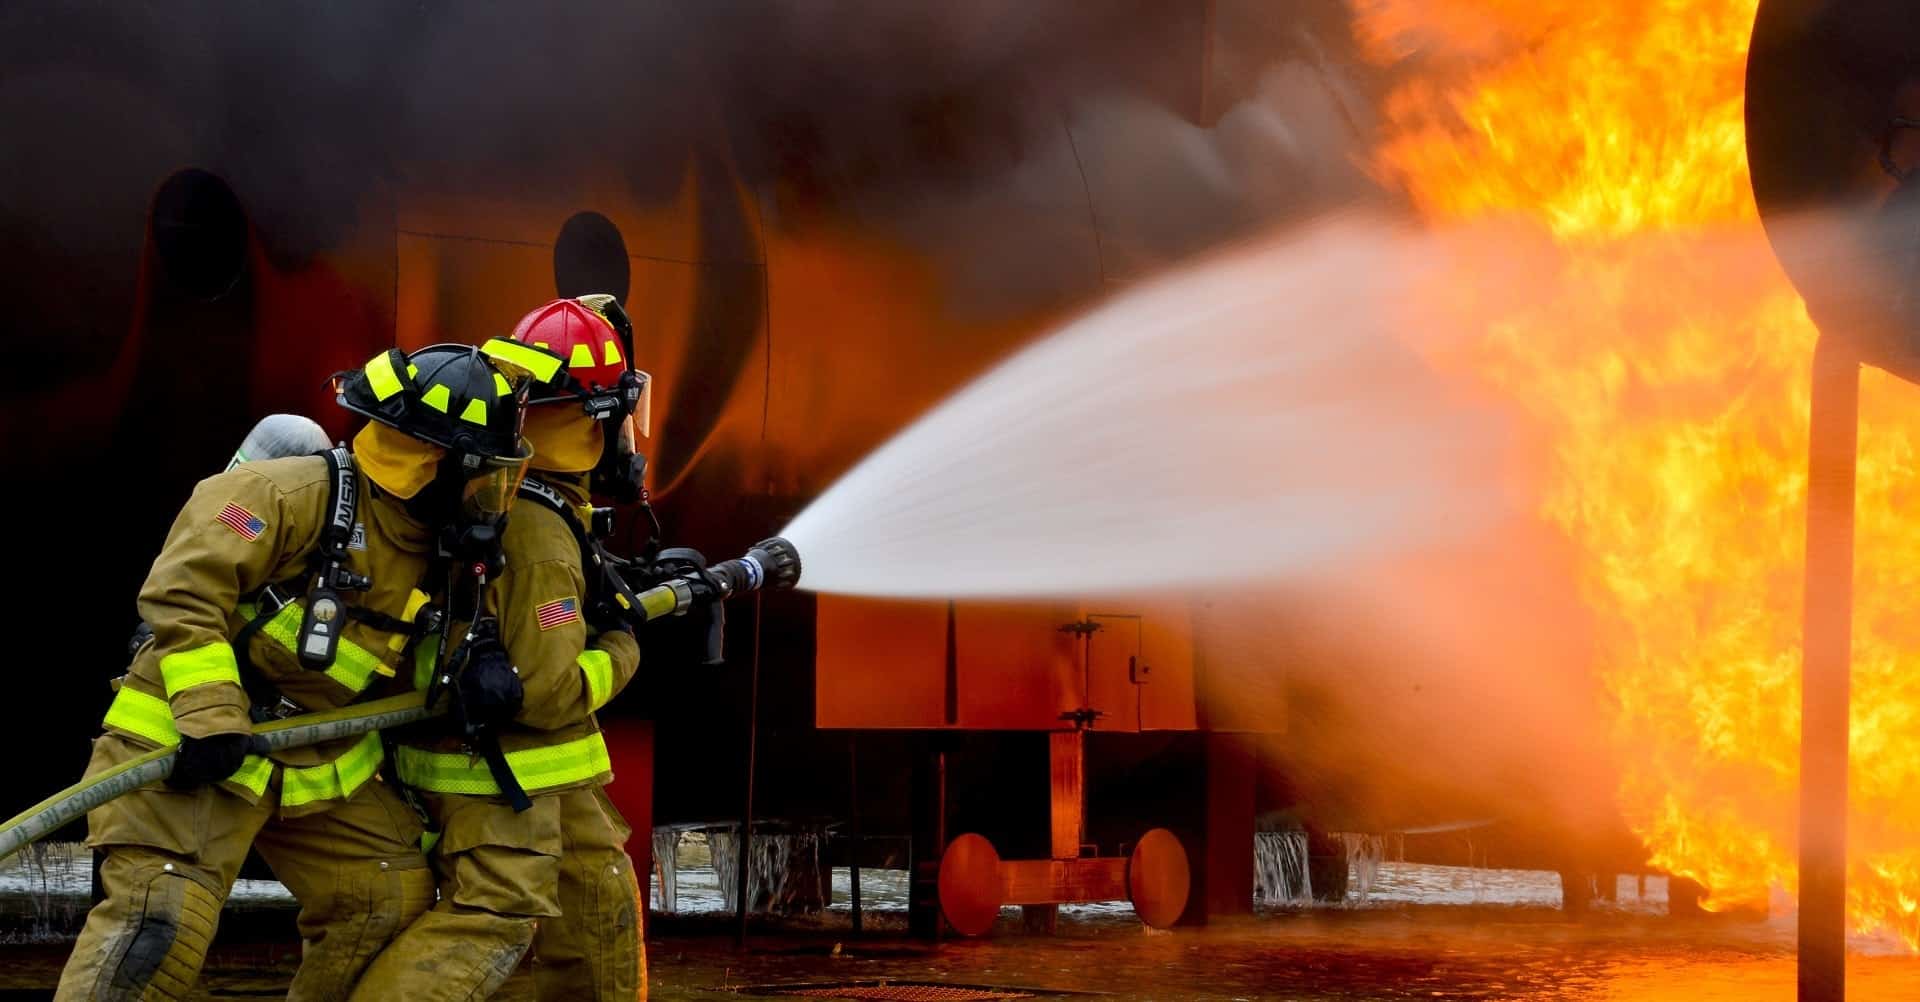 AI fire helmet expected to be the future of firefighting